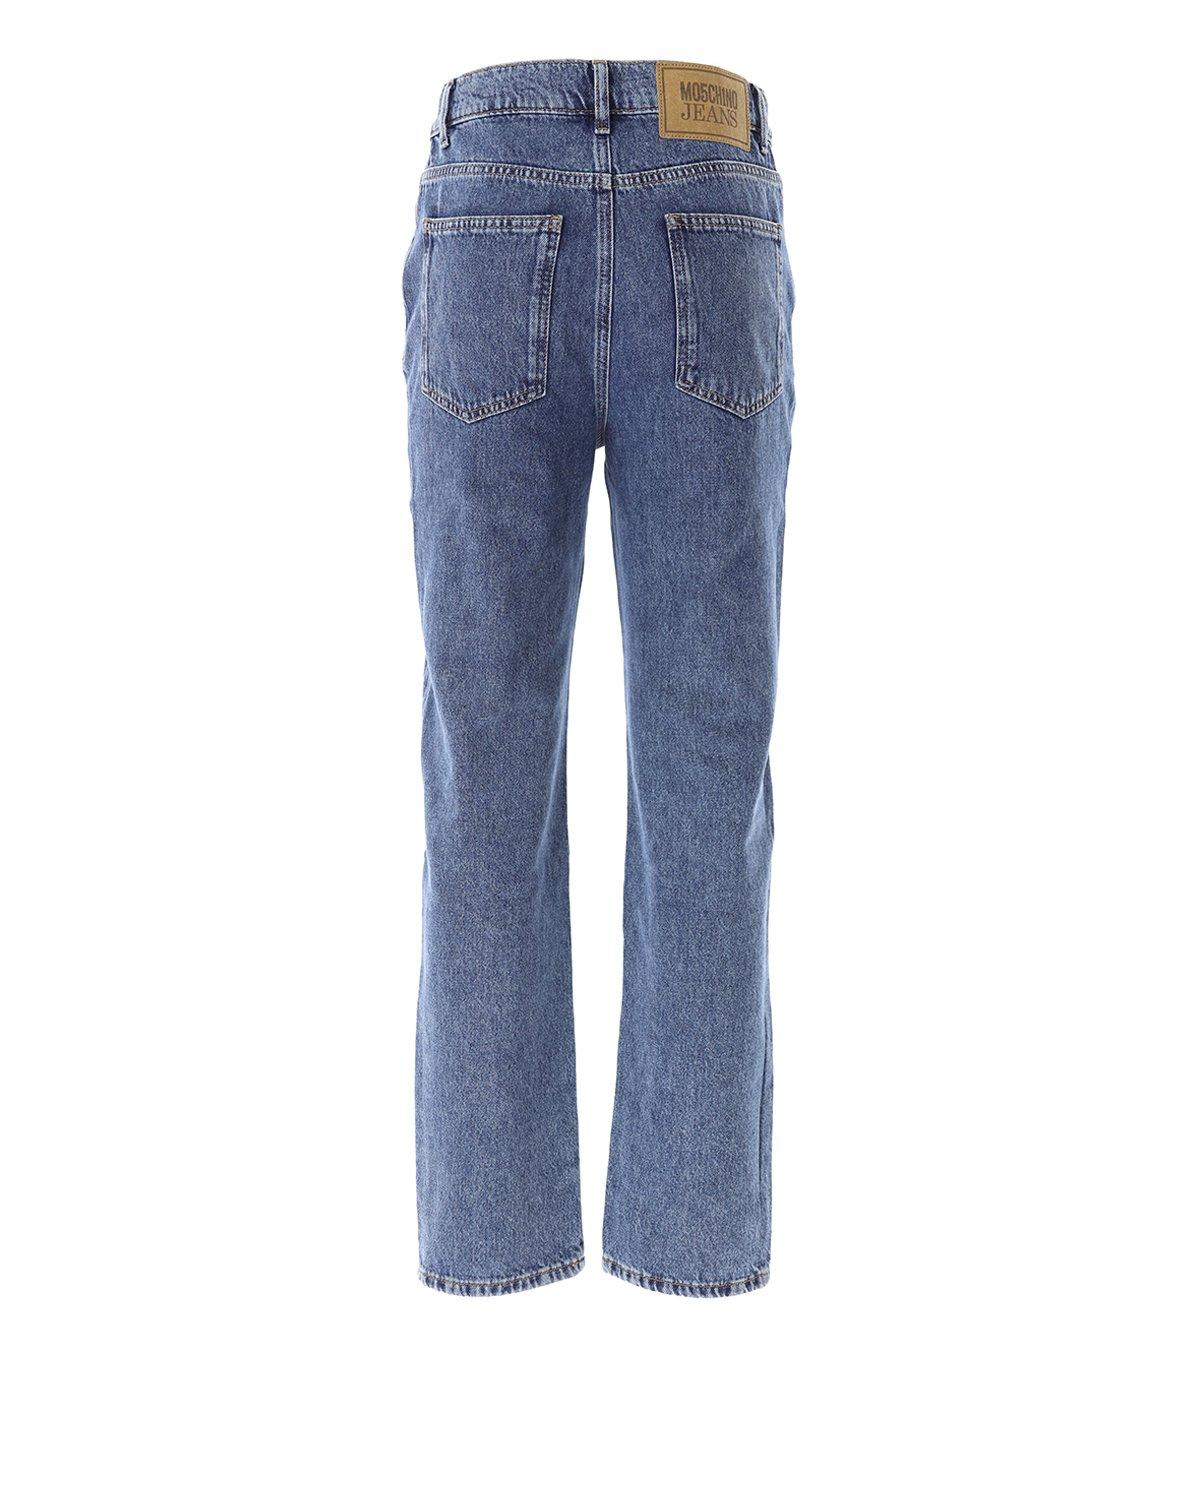 Shop Moschino Jeans Straight Leg Washed Denim Jeans In Fantasia Blu